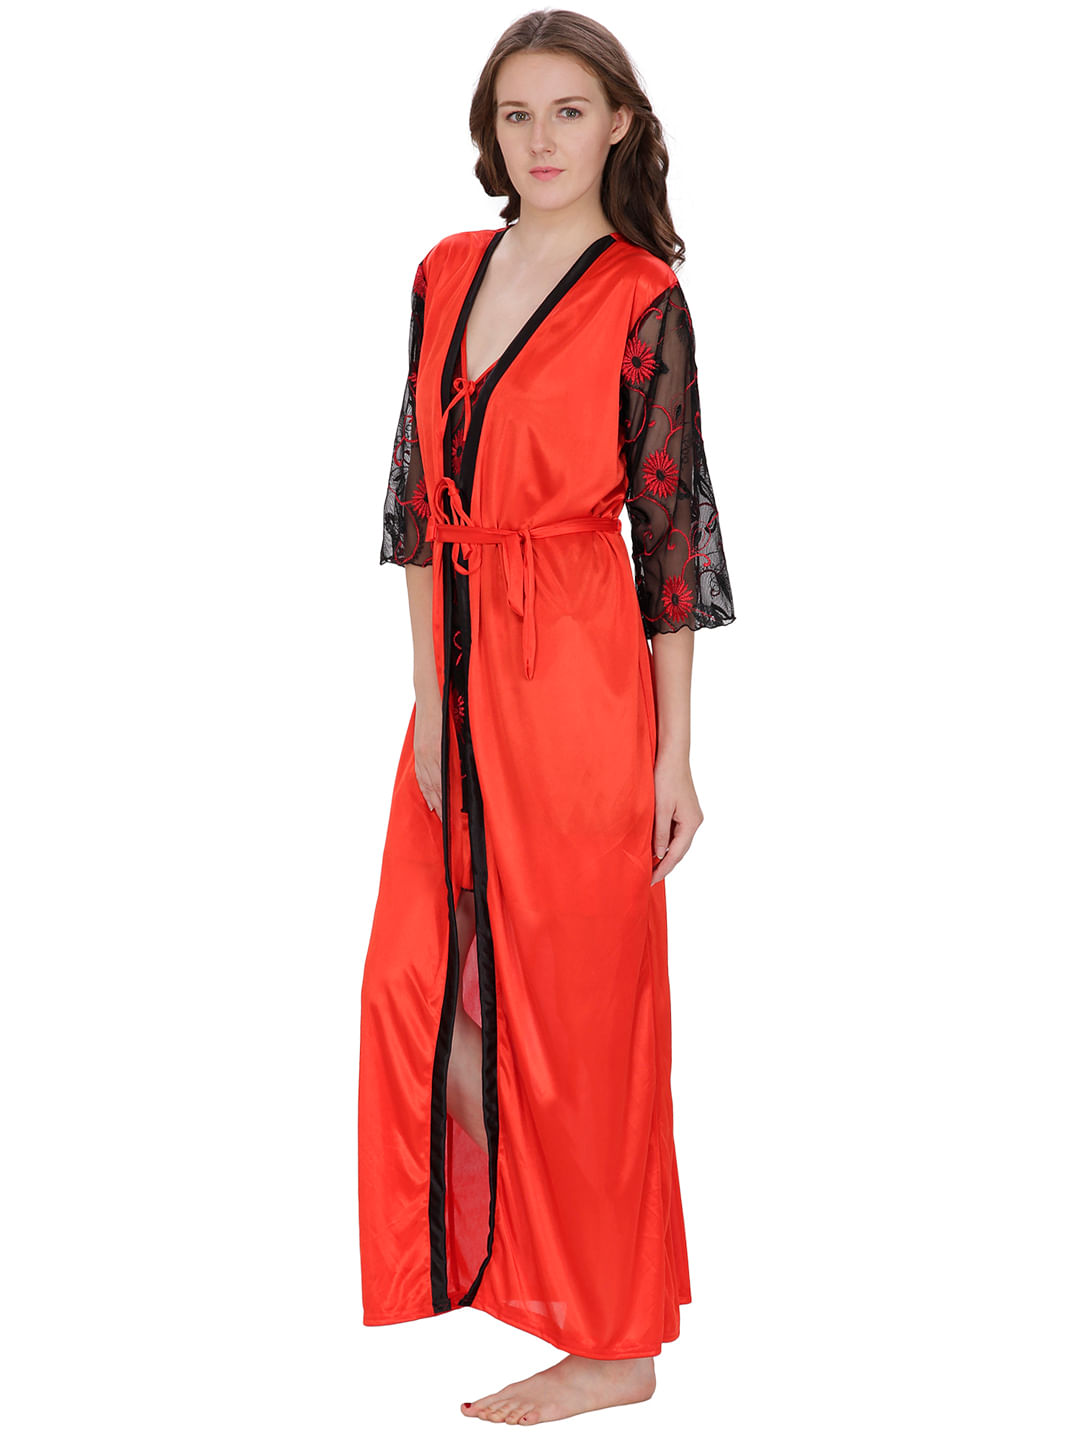 Net, Satin Red Robe (Red, Free Size)